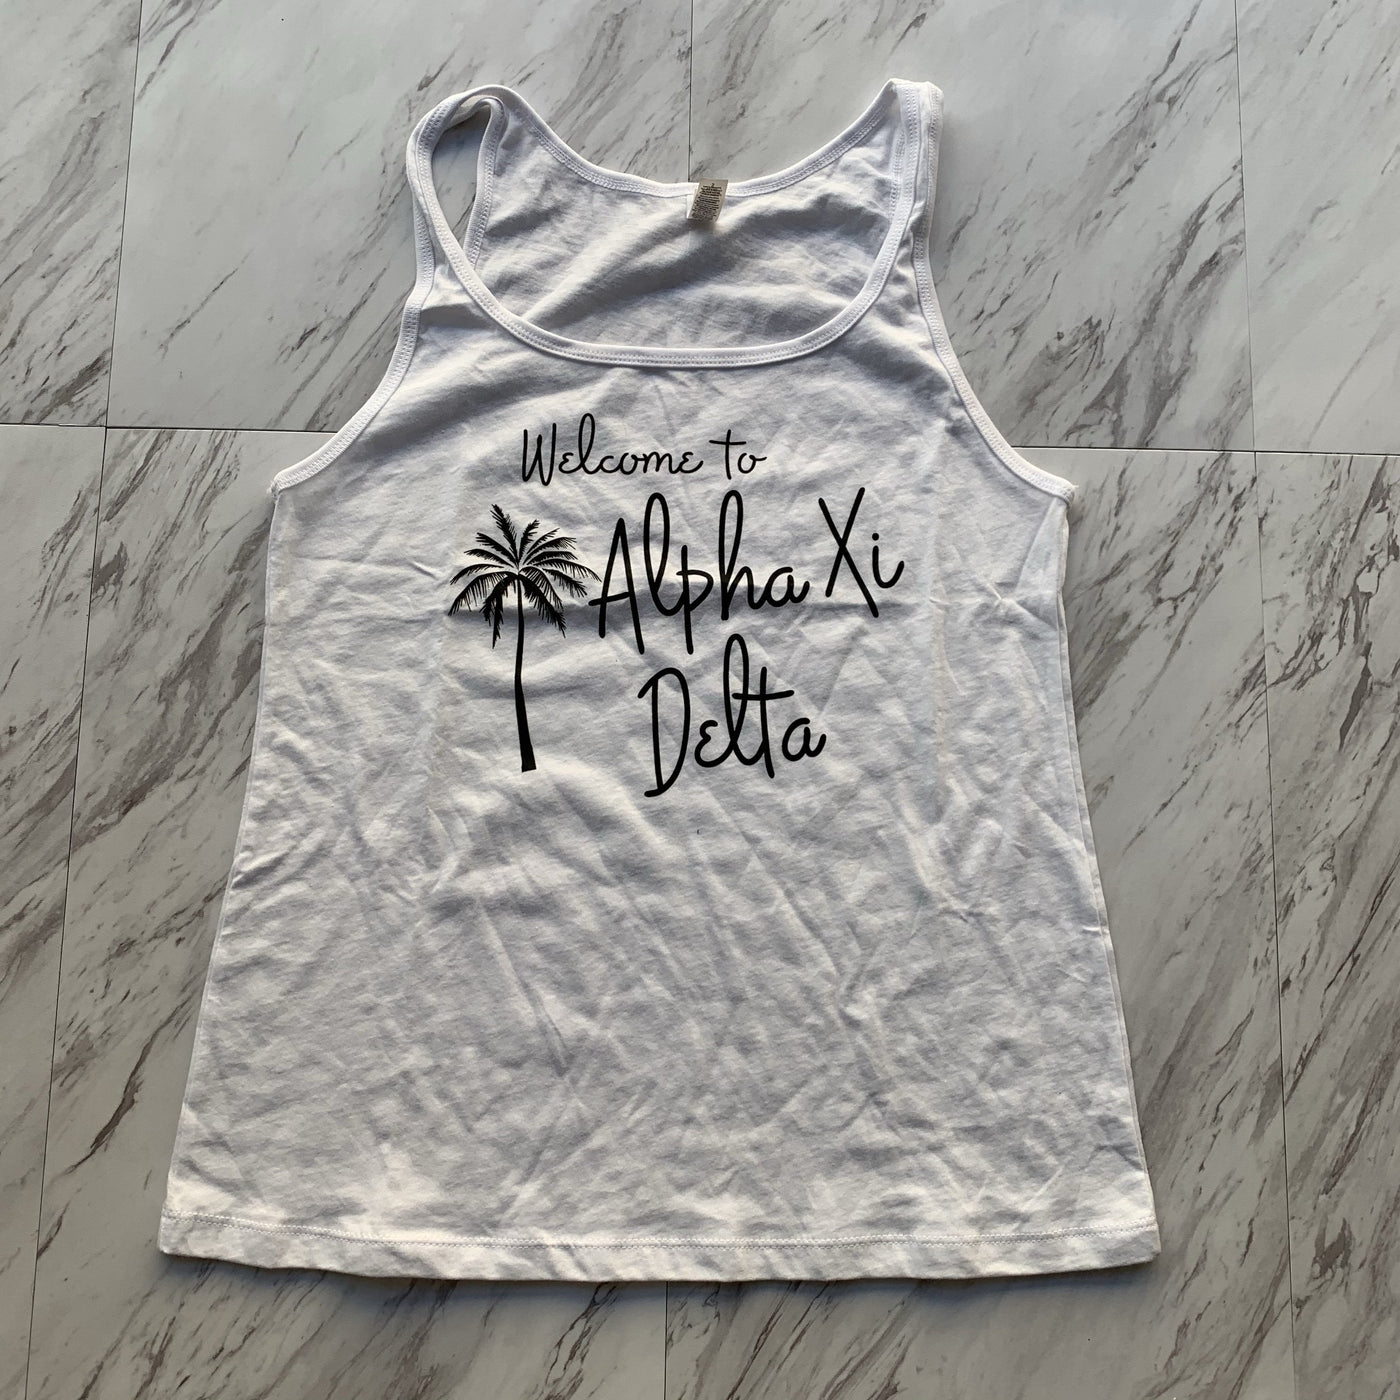 Alpha Xi Delta welcome to axid ladies tank